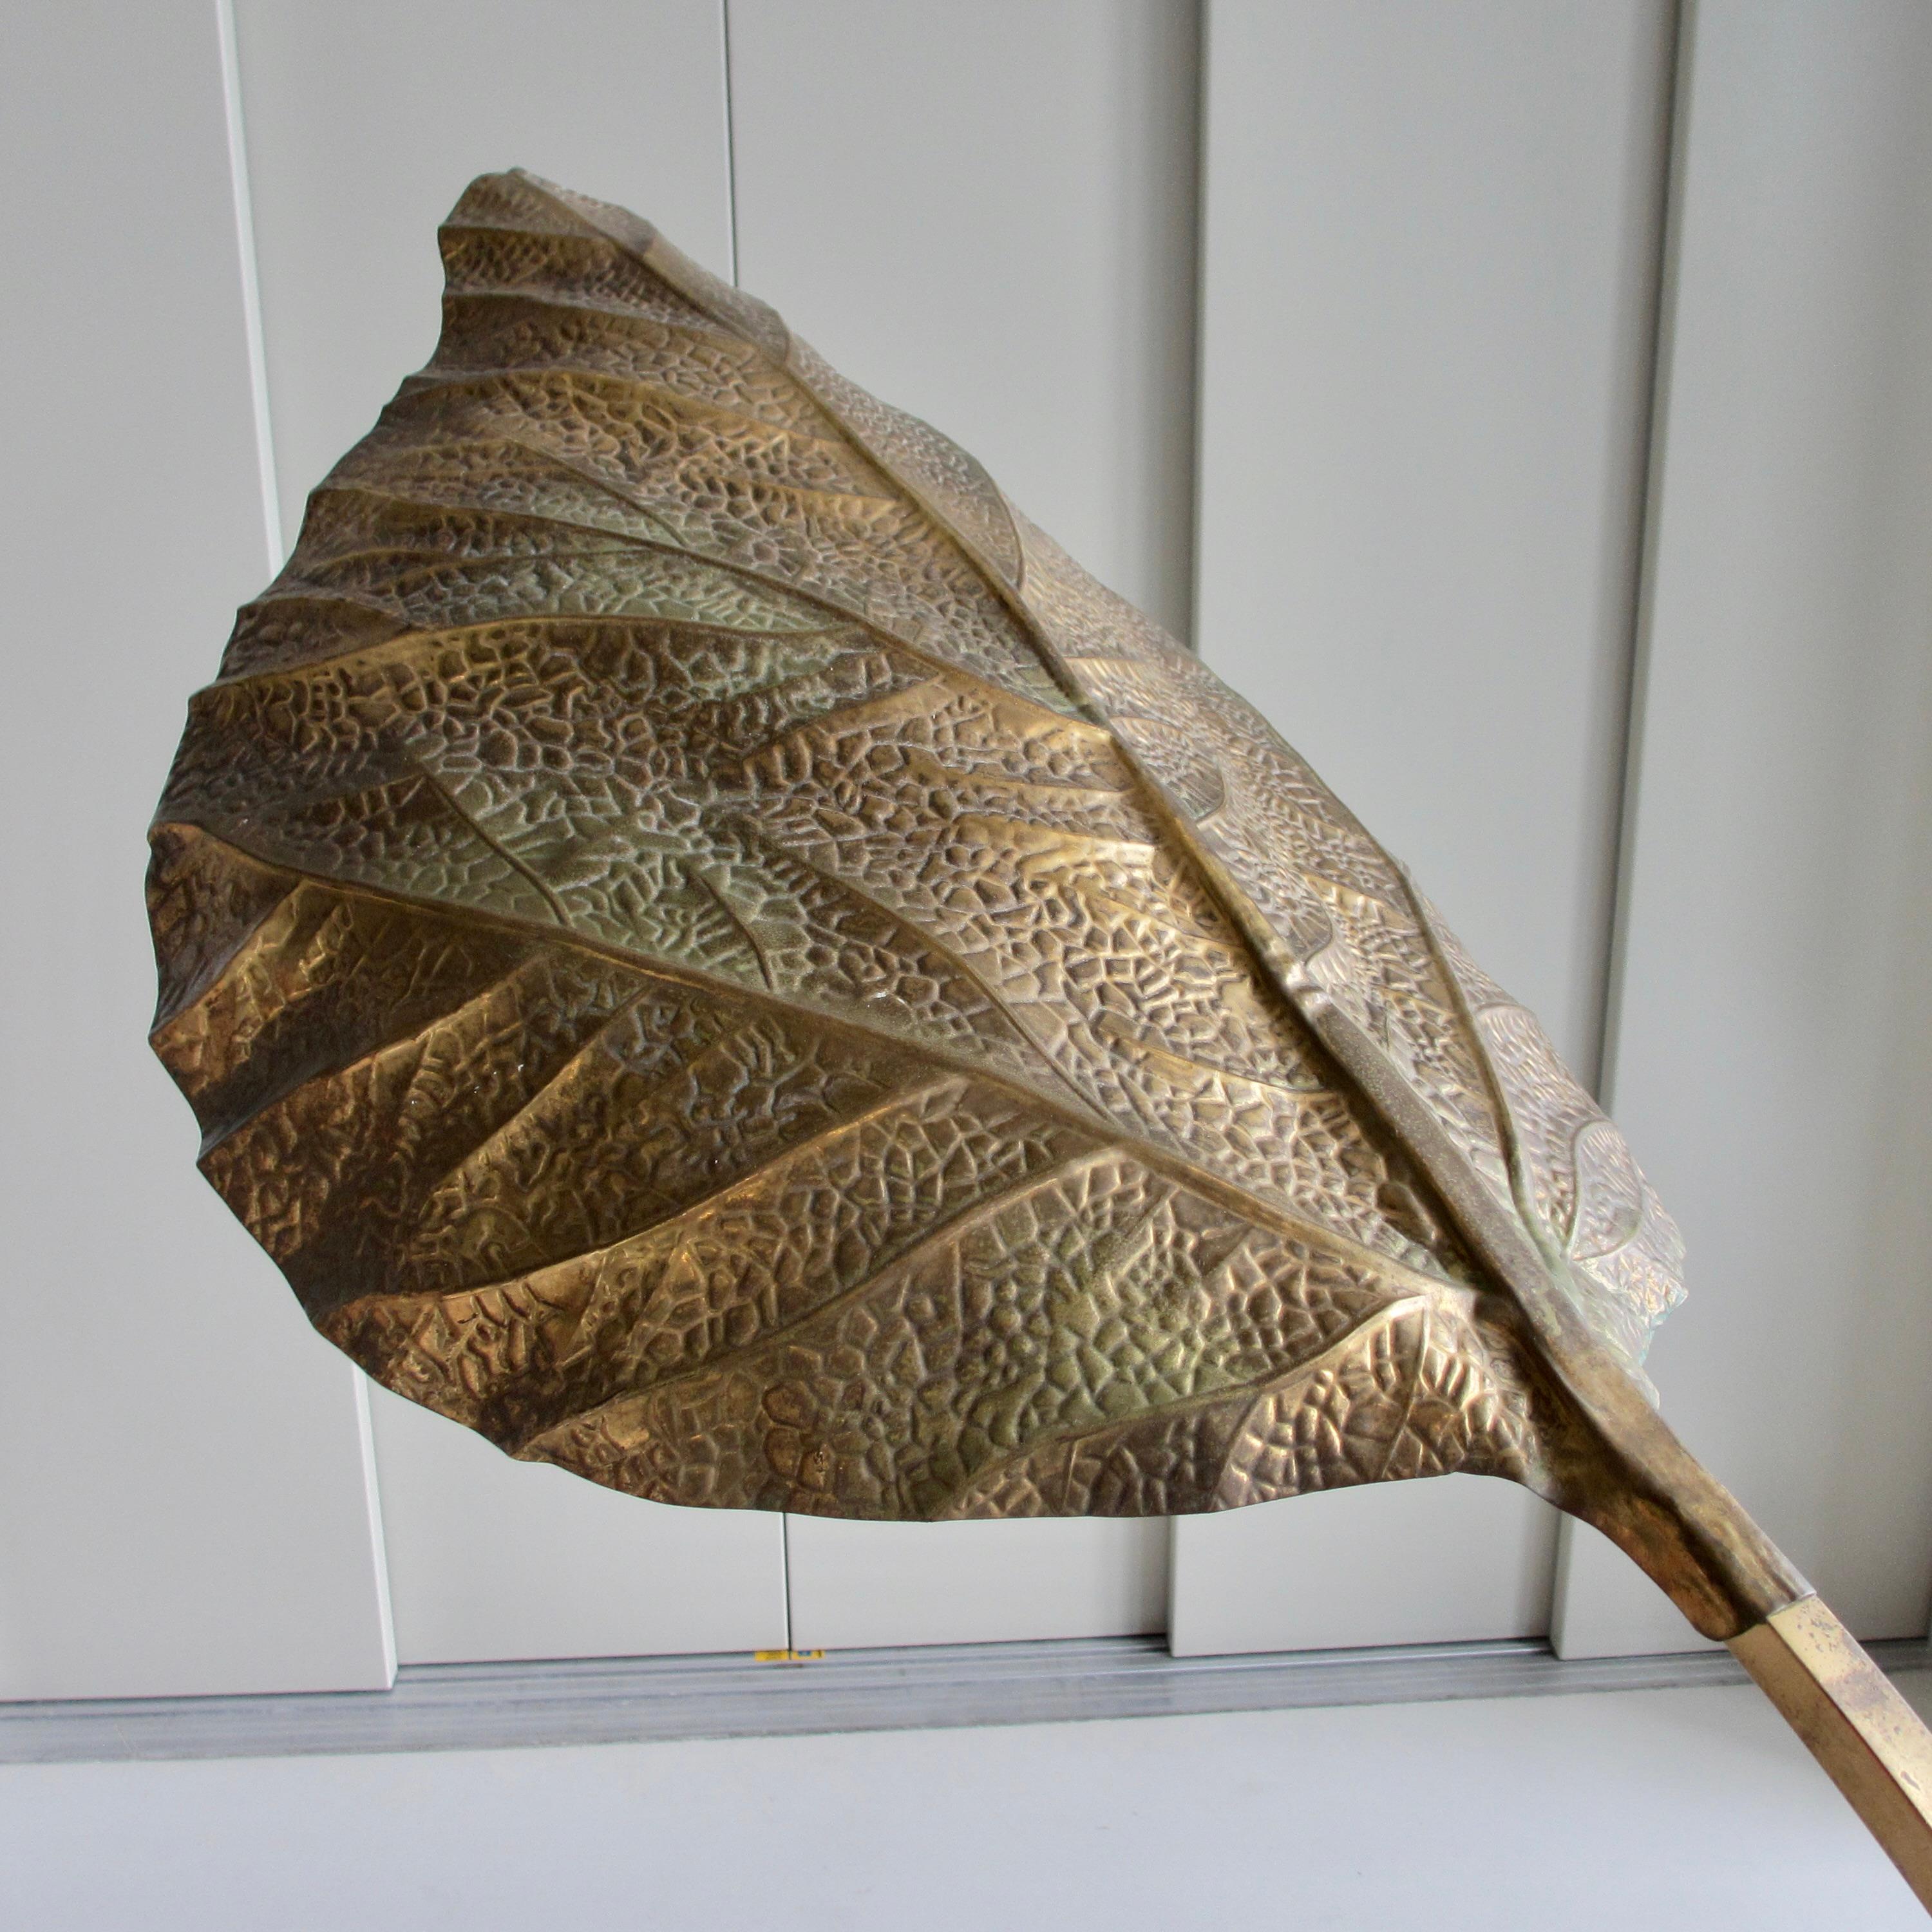 Floor lamp designed by Carlo Giorgi. Italy, Atelier Bottega Gadda, 1970s.

'RABARBARO' floor lamp with three large illuminated leaves in hammered brass and organically shaped brass structure. Please note, this is an original piece from the 1970s,